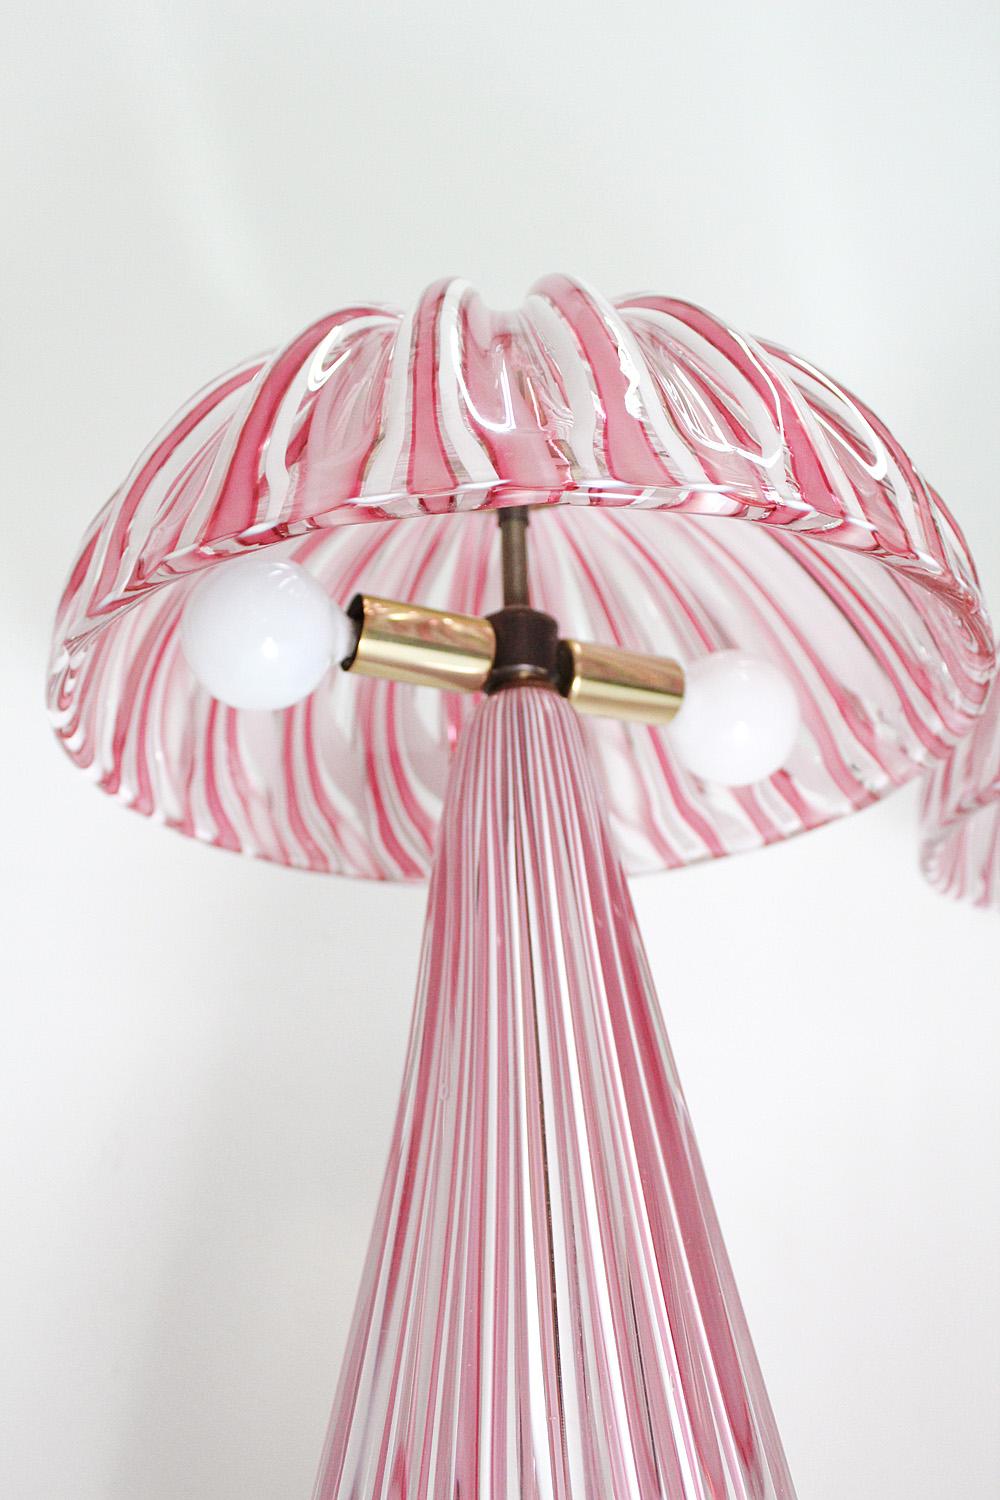 Italian Pair of Pink and White Vetrarti Murano Glass Lamps, Circa 1980 For Sale